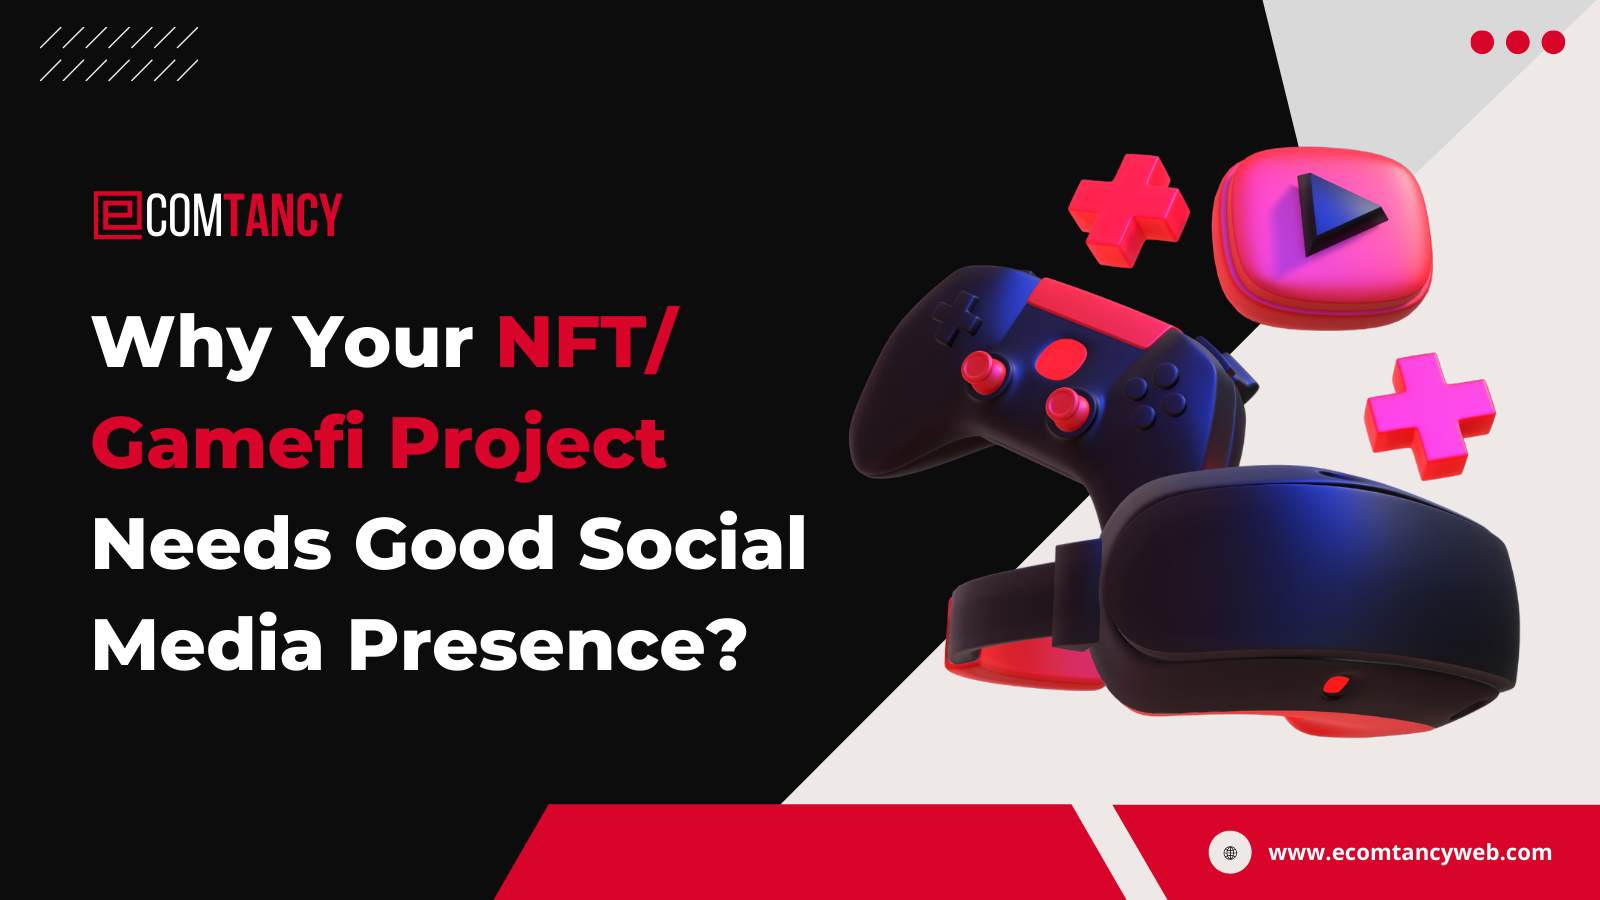 10 Reasons Why Your NFT/ Gamefi Project Needs Social Media Good Presence